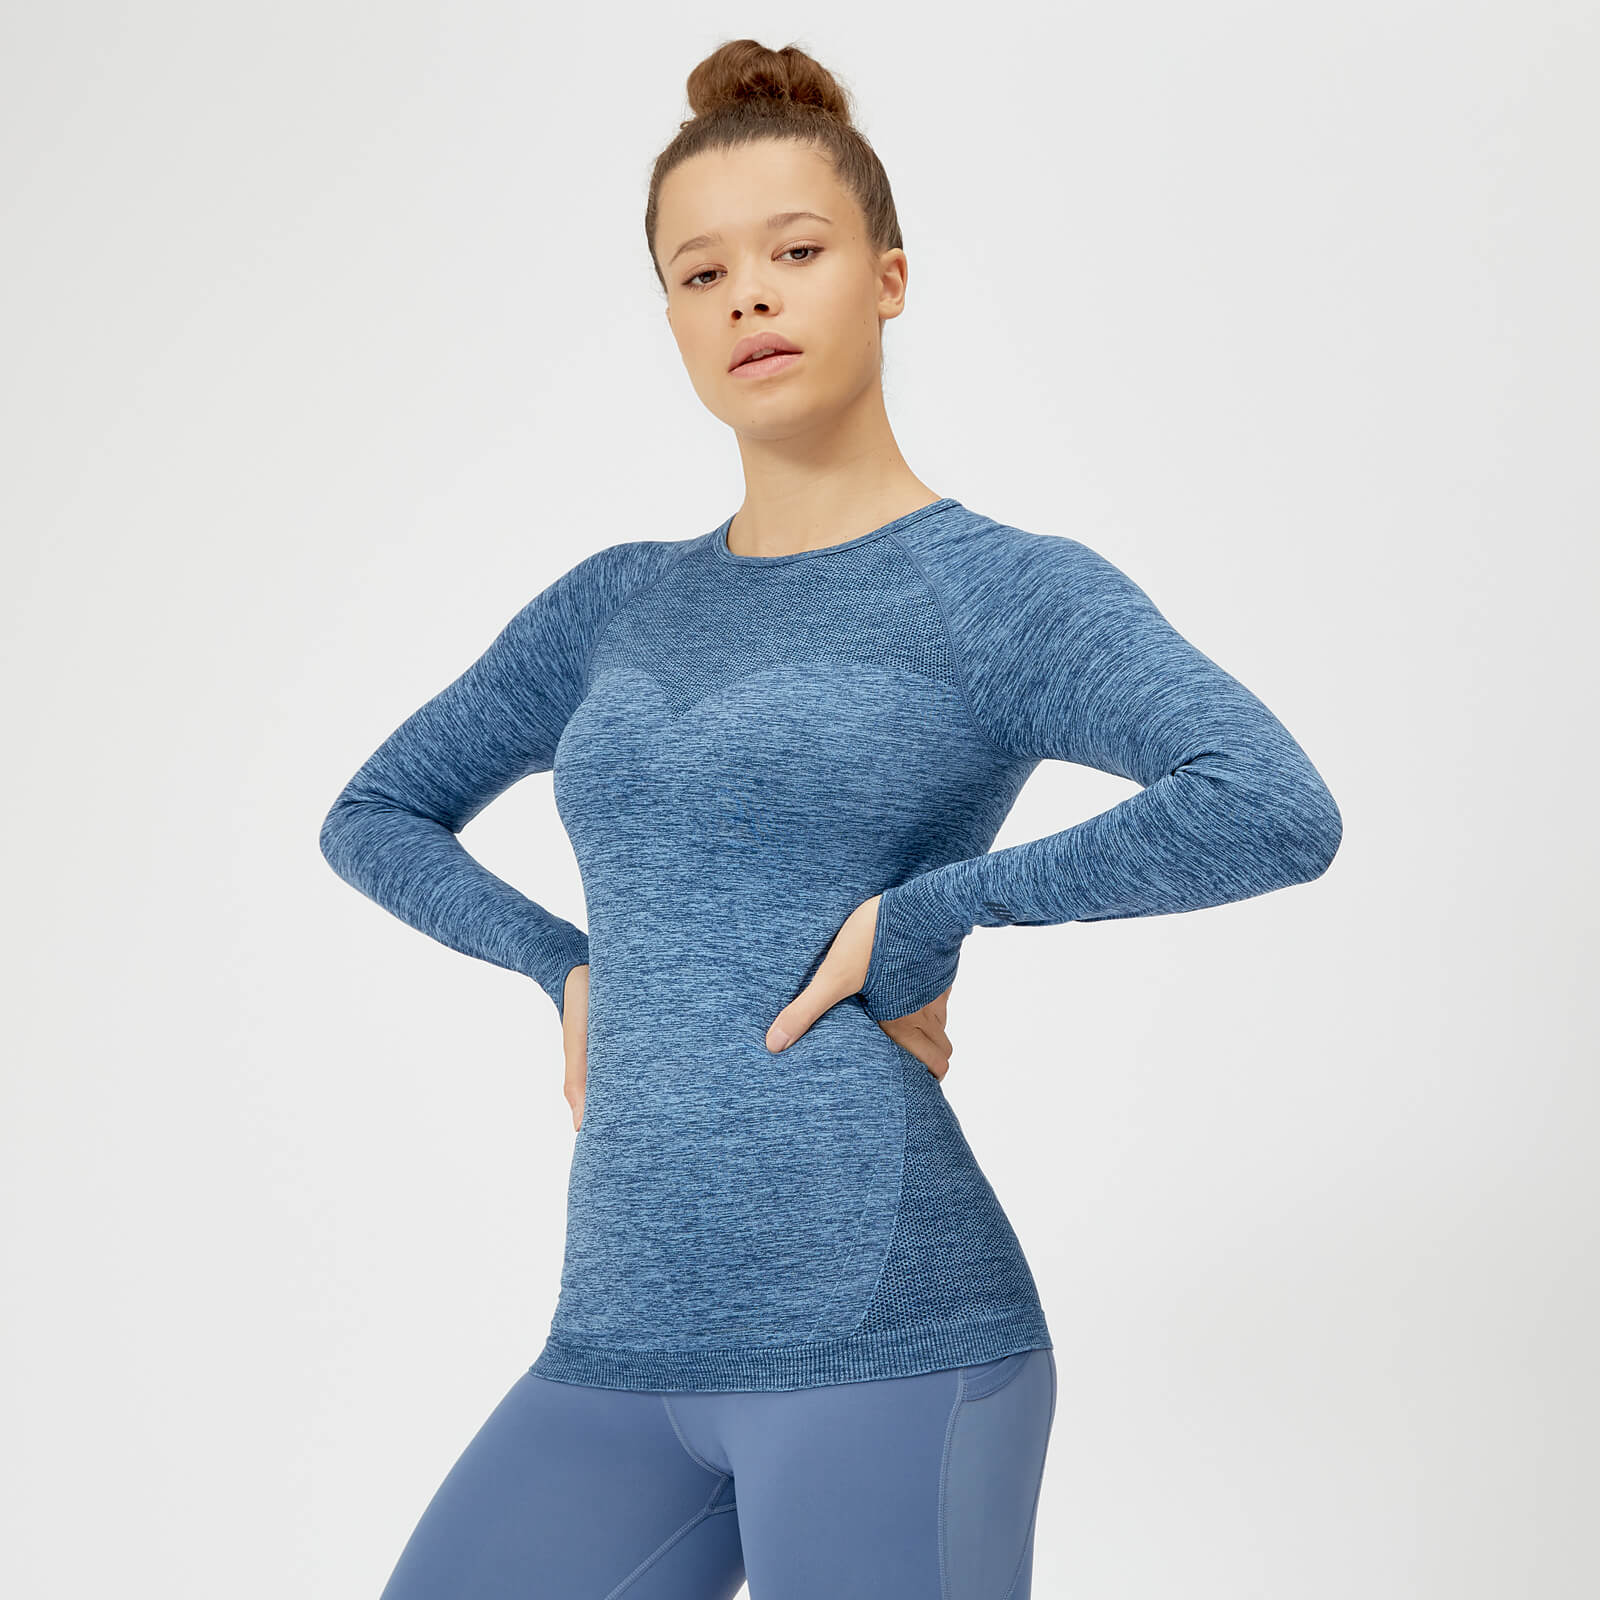 Myprotein Inspire Seamless Long Sleeve Top - Blue - XS